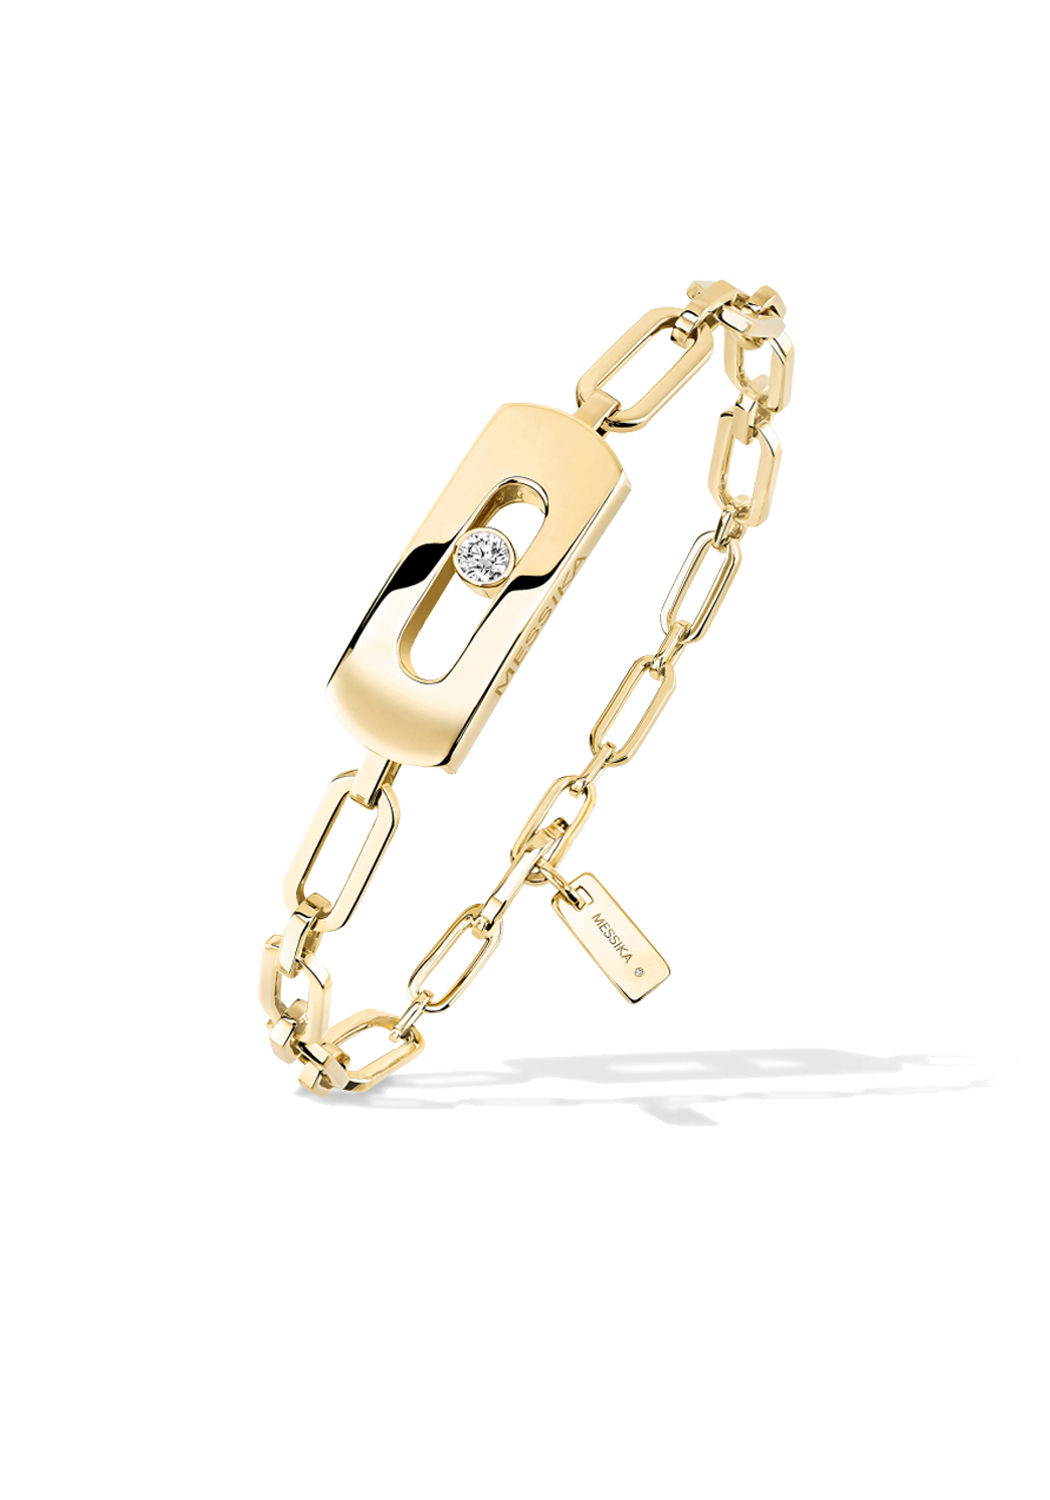 Messika My Move 18K Yellow Gold Interchangeable Chain Bracelet | Ref. 12387 | OsterJewelers.com